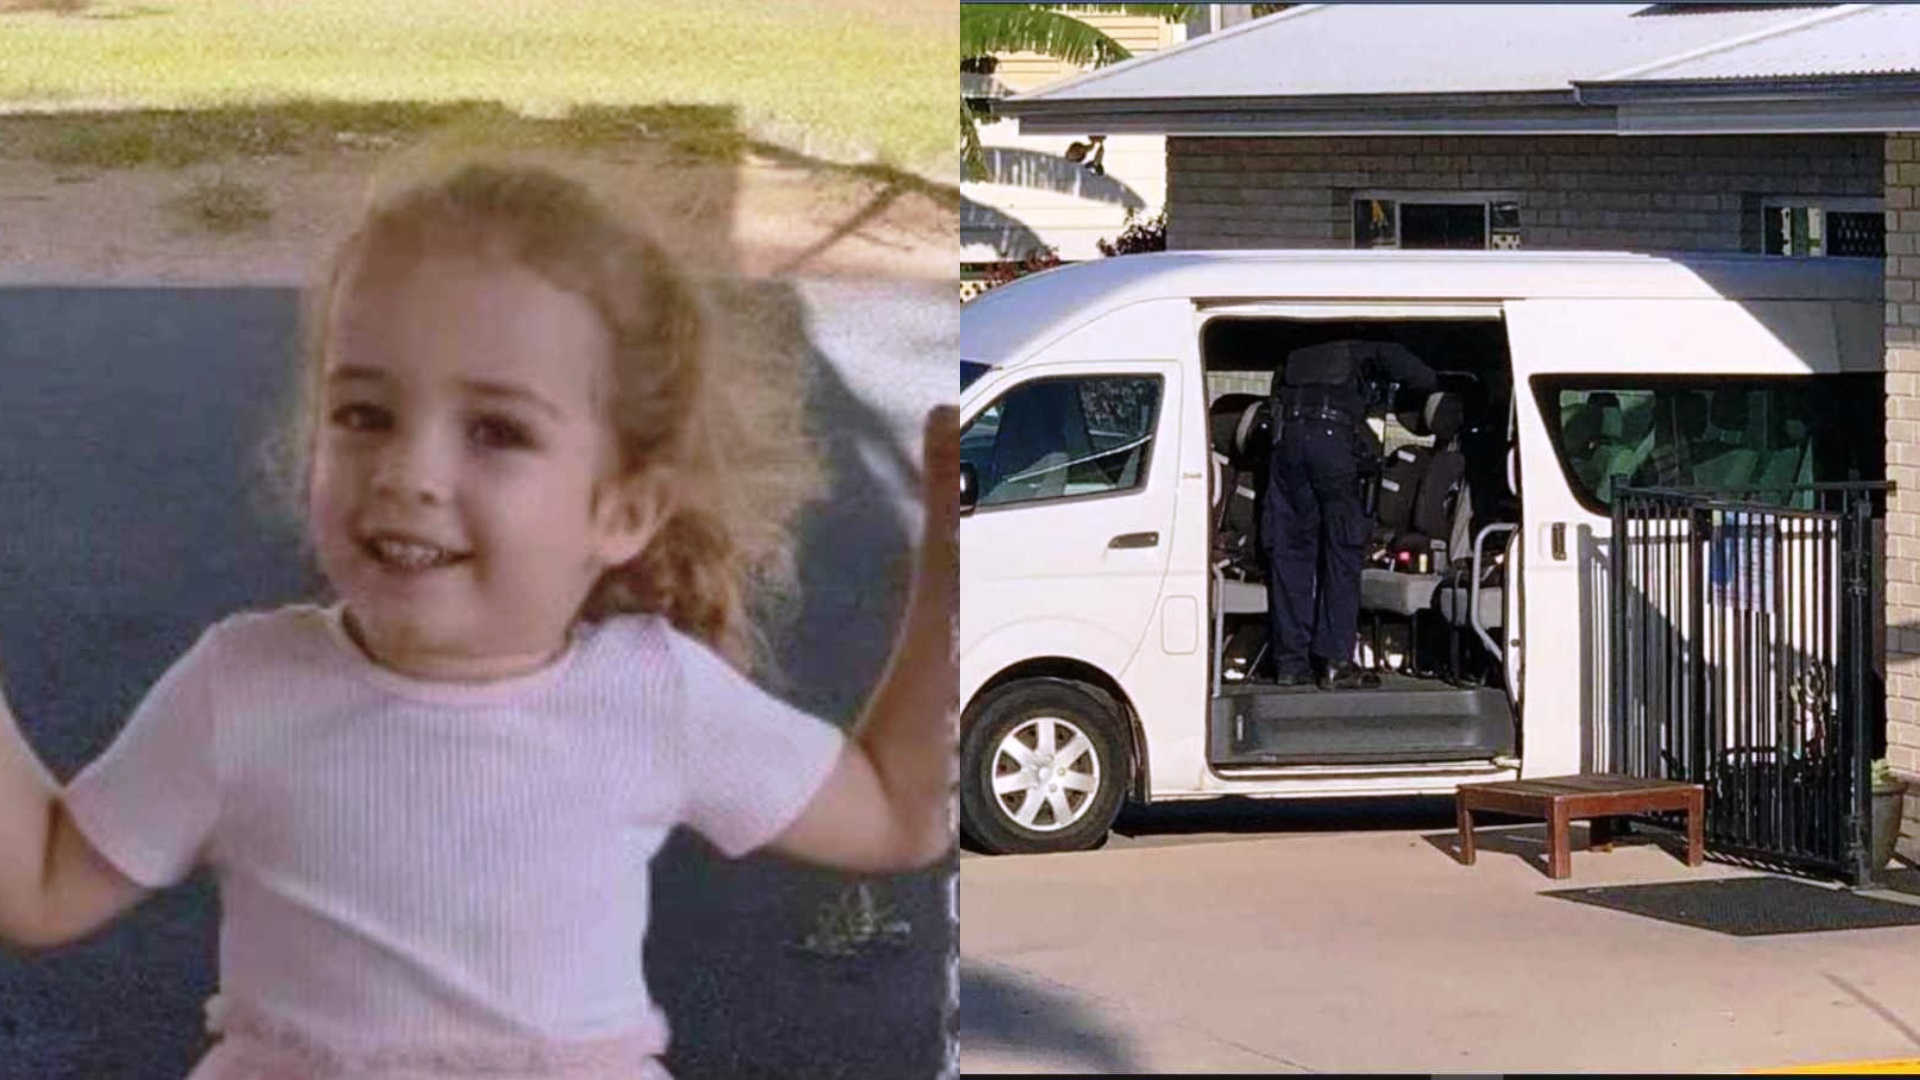 Family Furious after Toddler Found Unconcious on Childcare Bus After 6 Hours